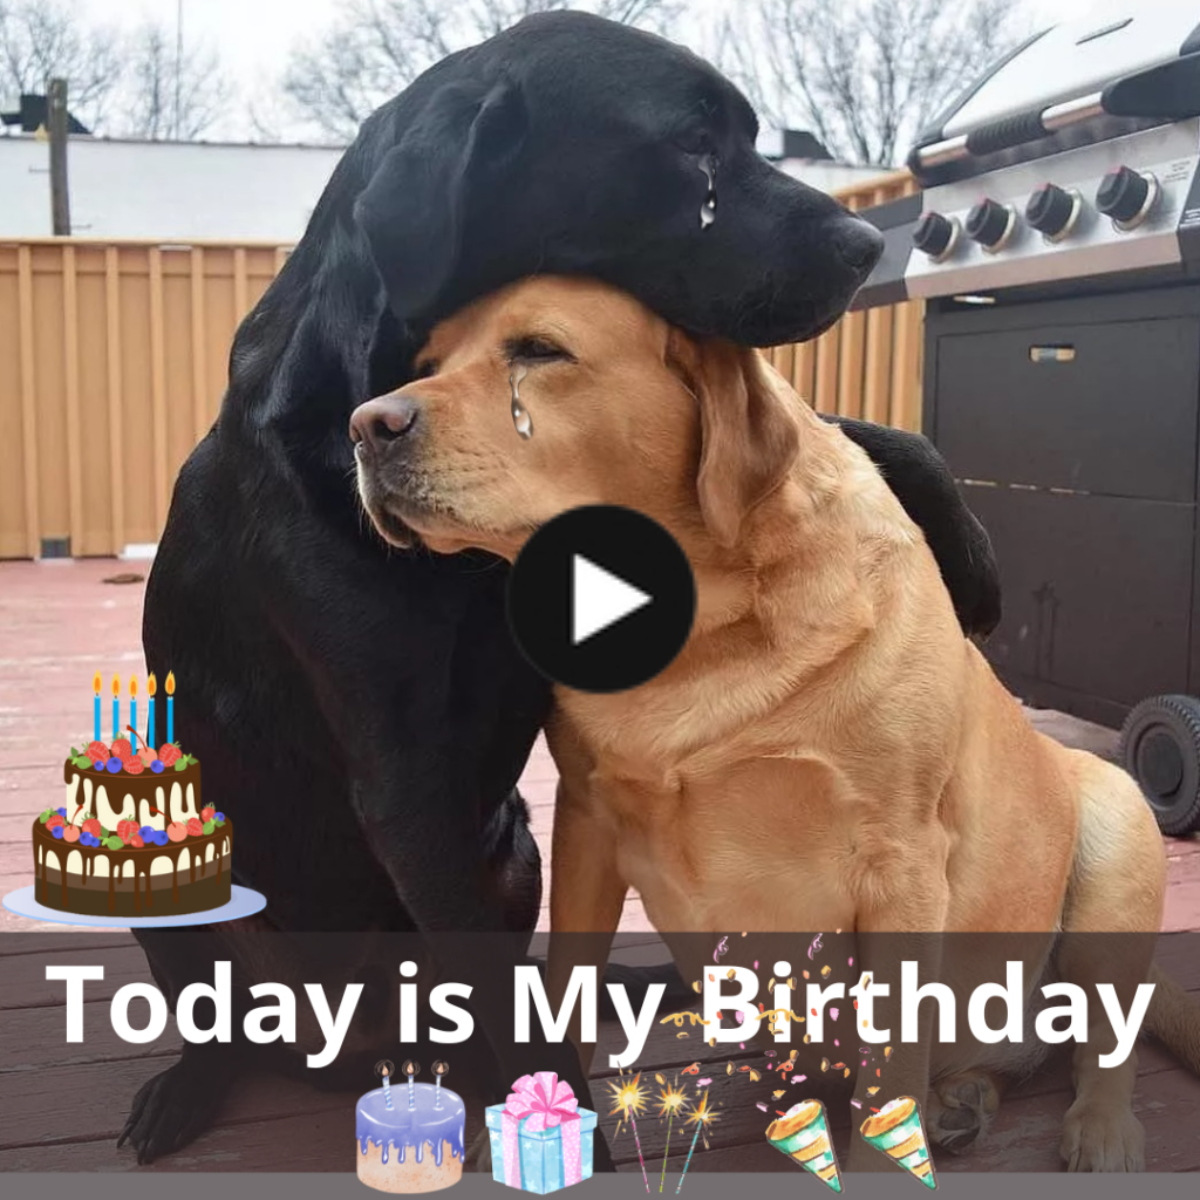 Two Lost Dogs’ Birthdays Are Celebrated in This Endearing Reunion